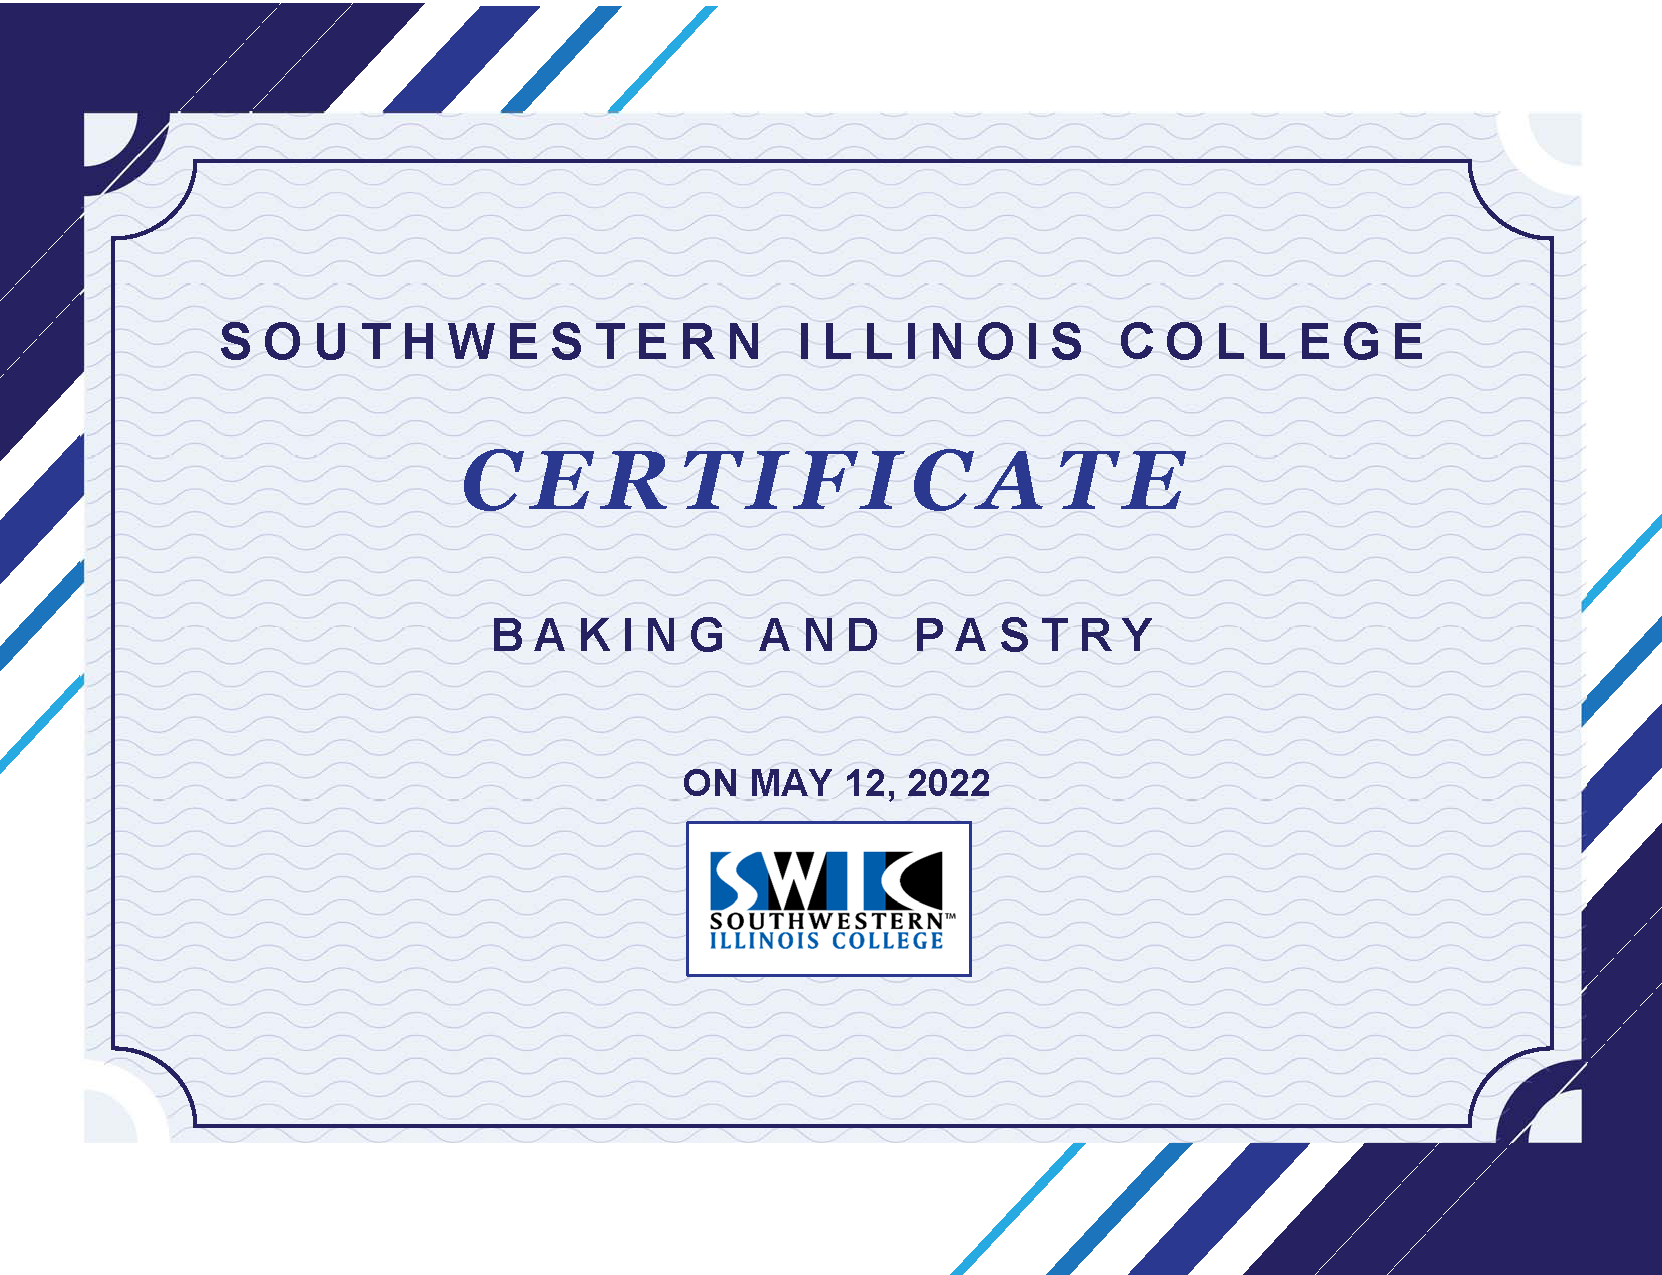 Southwestern Illinois College Certificate Baking and Pastry